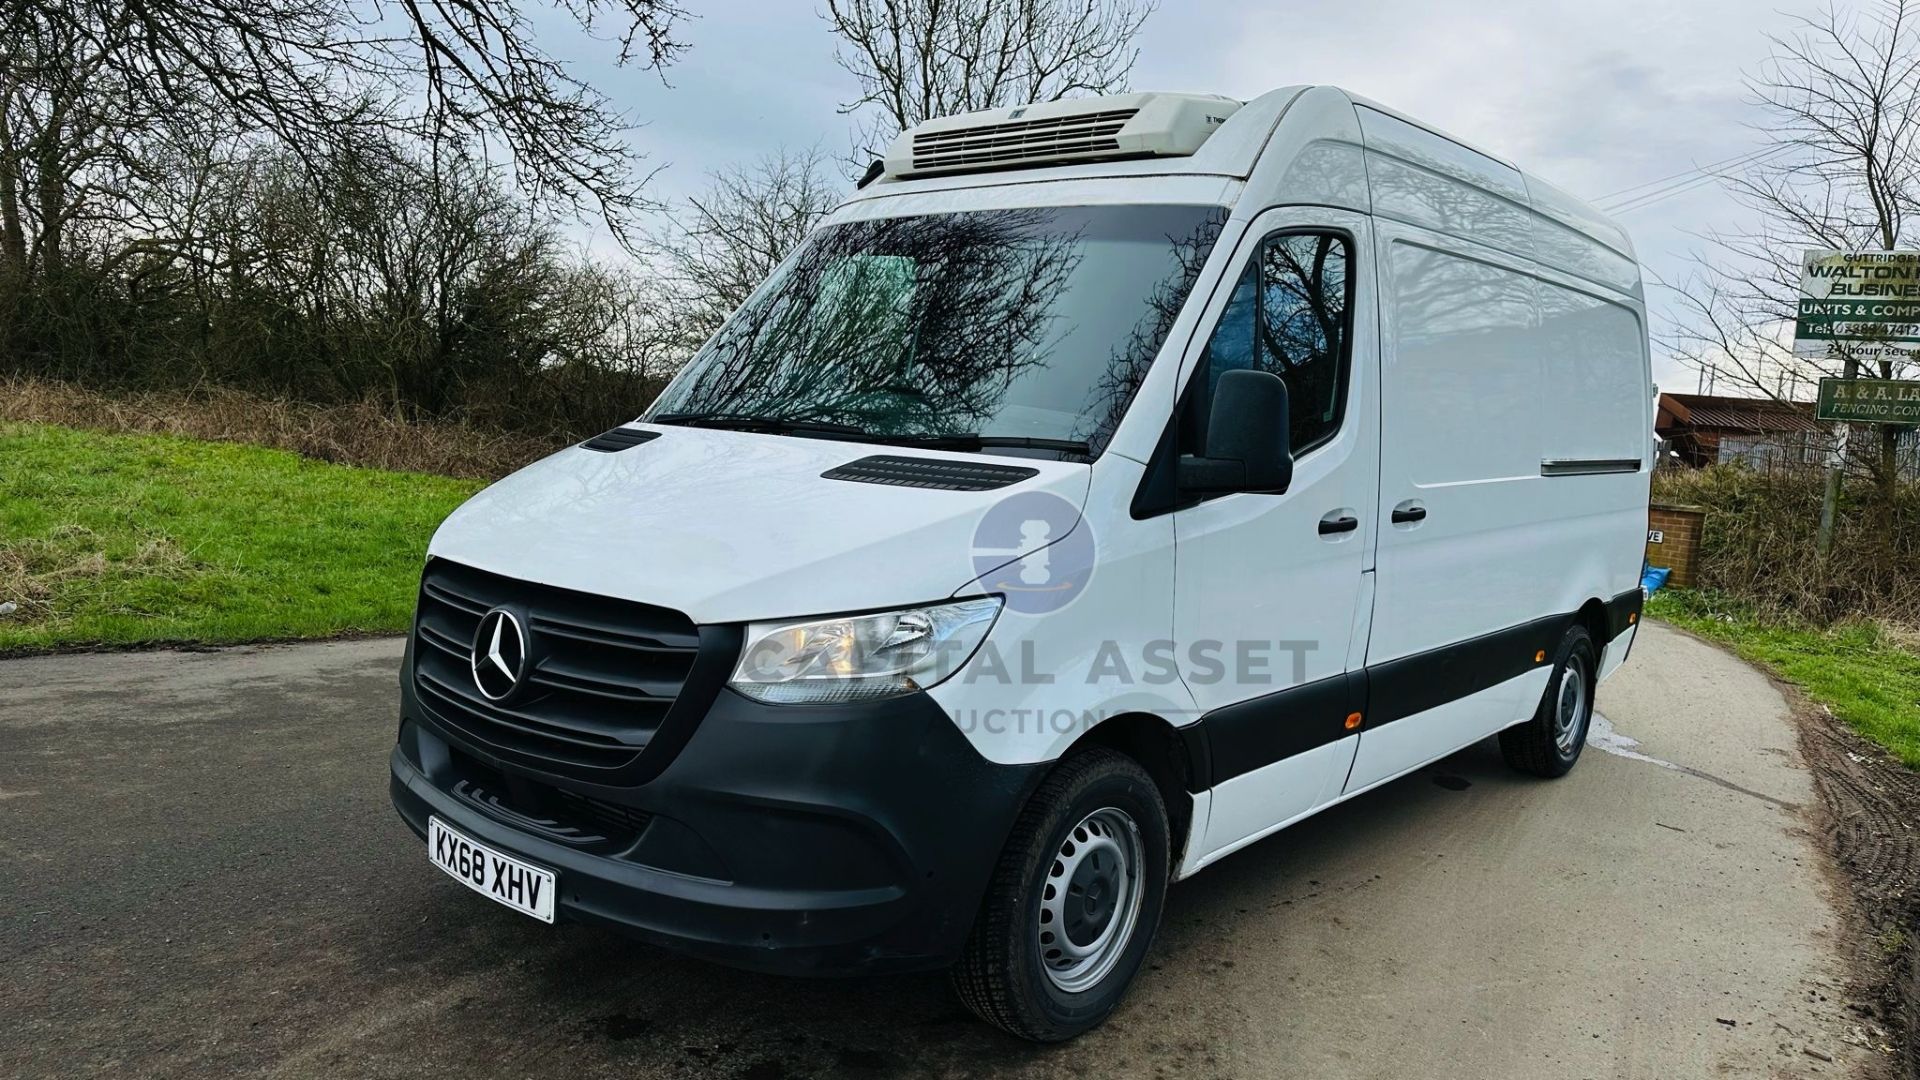 MERCEDES-BENZ SPRINTER 314 CDI *MWB - REFRIGERATED VAN* (2019 - FACELIFT MODEL) *OVERNIGHT STANDBY* - Image 7 of 41